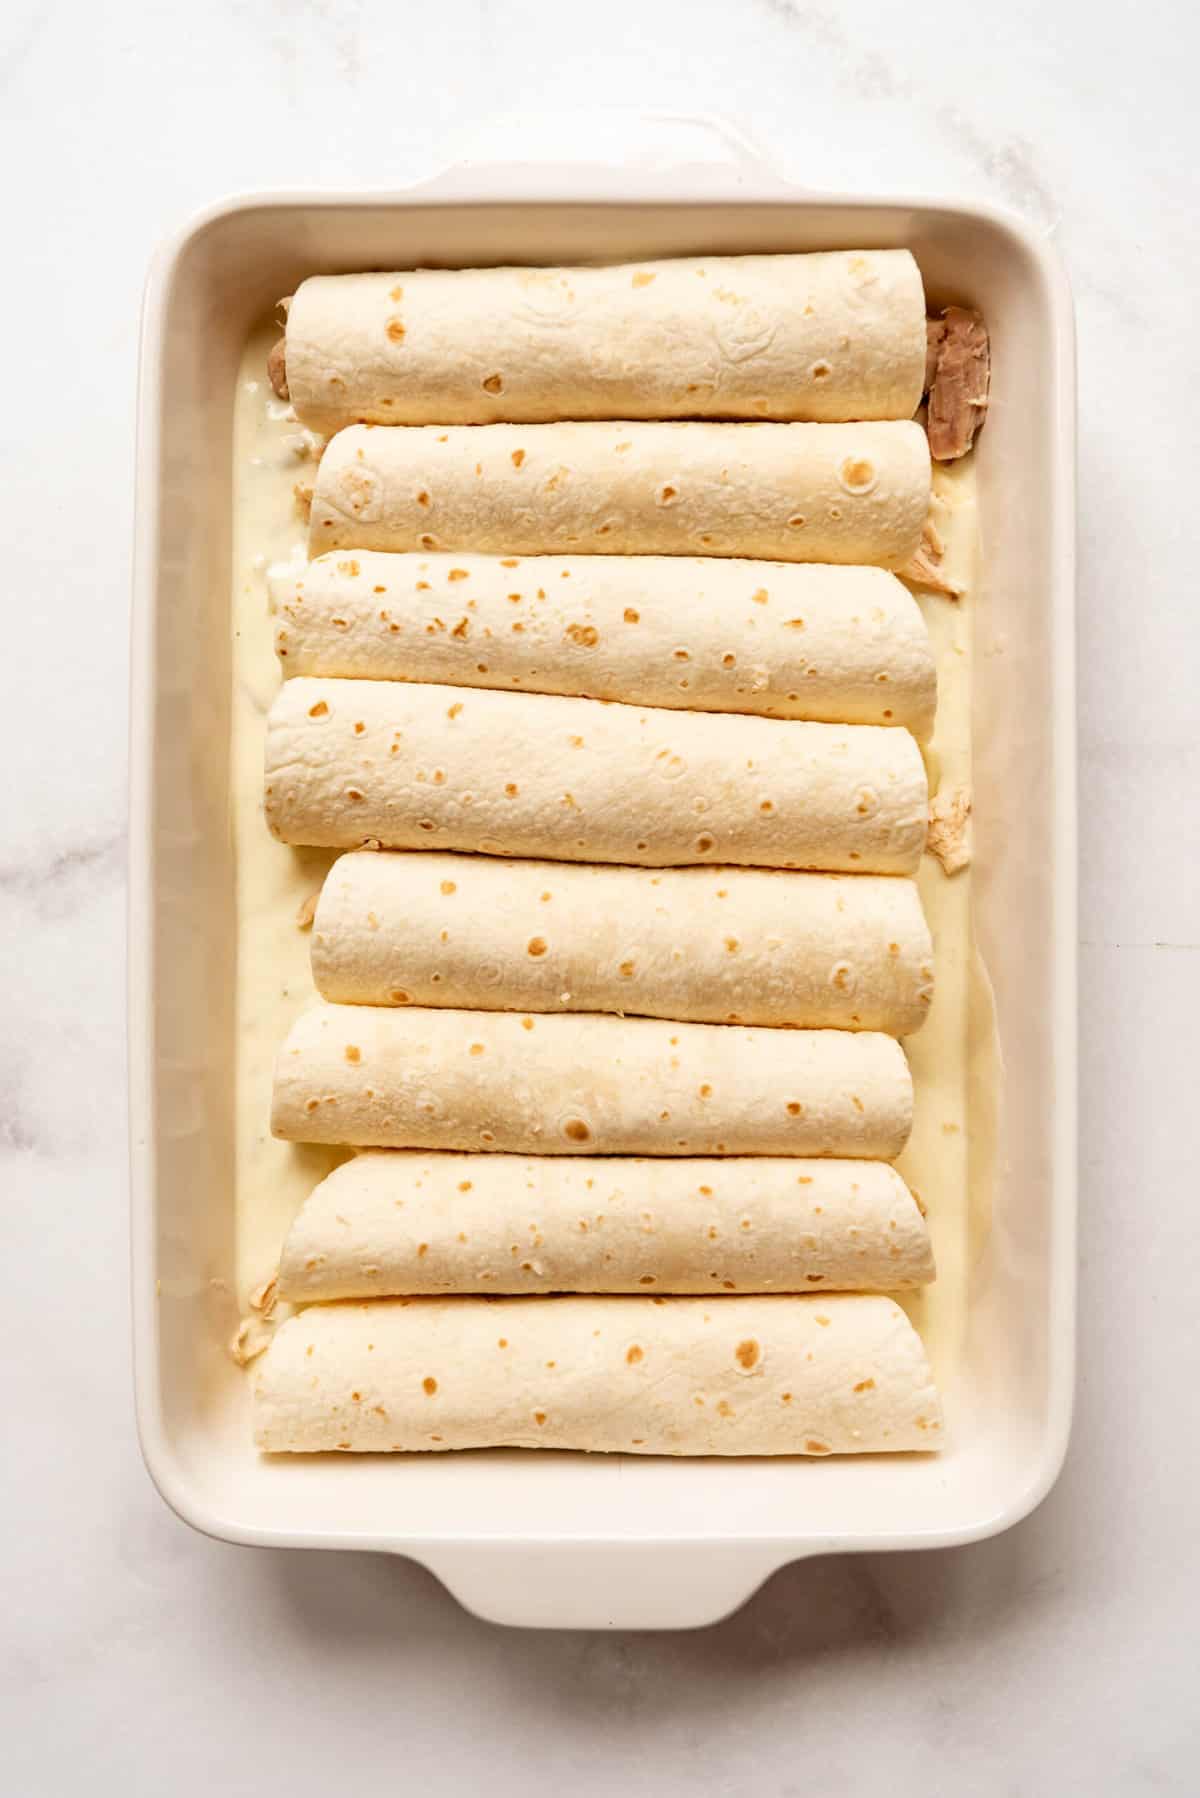 Tortillas filled with chicken and cheese rolled into enchiladas and place in a large white baking dish.